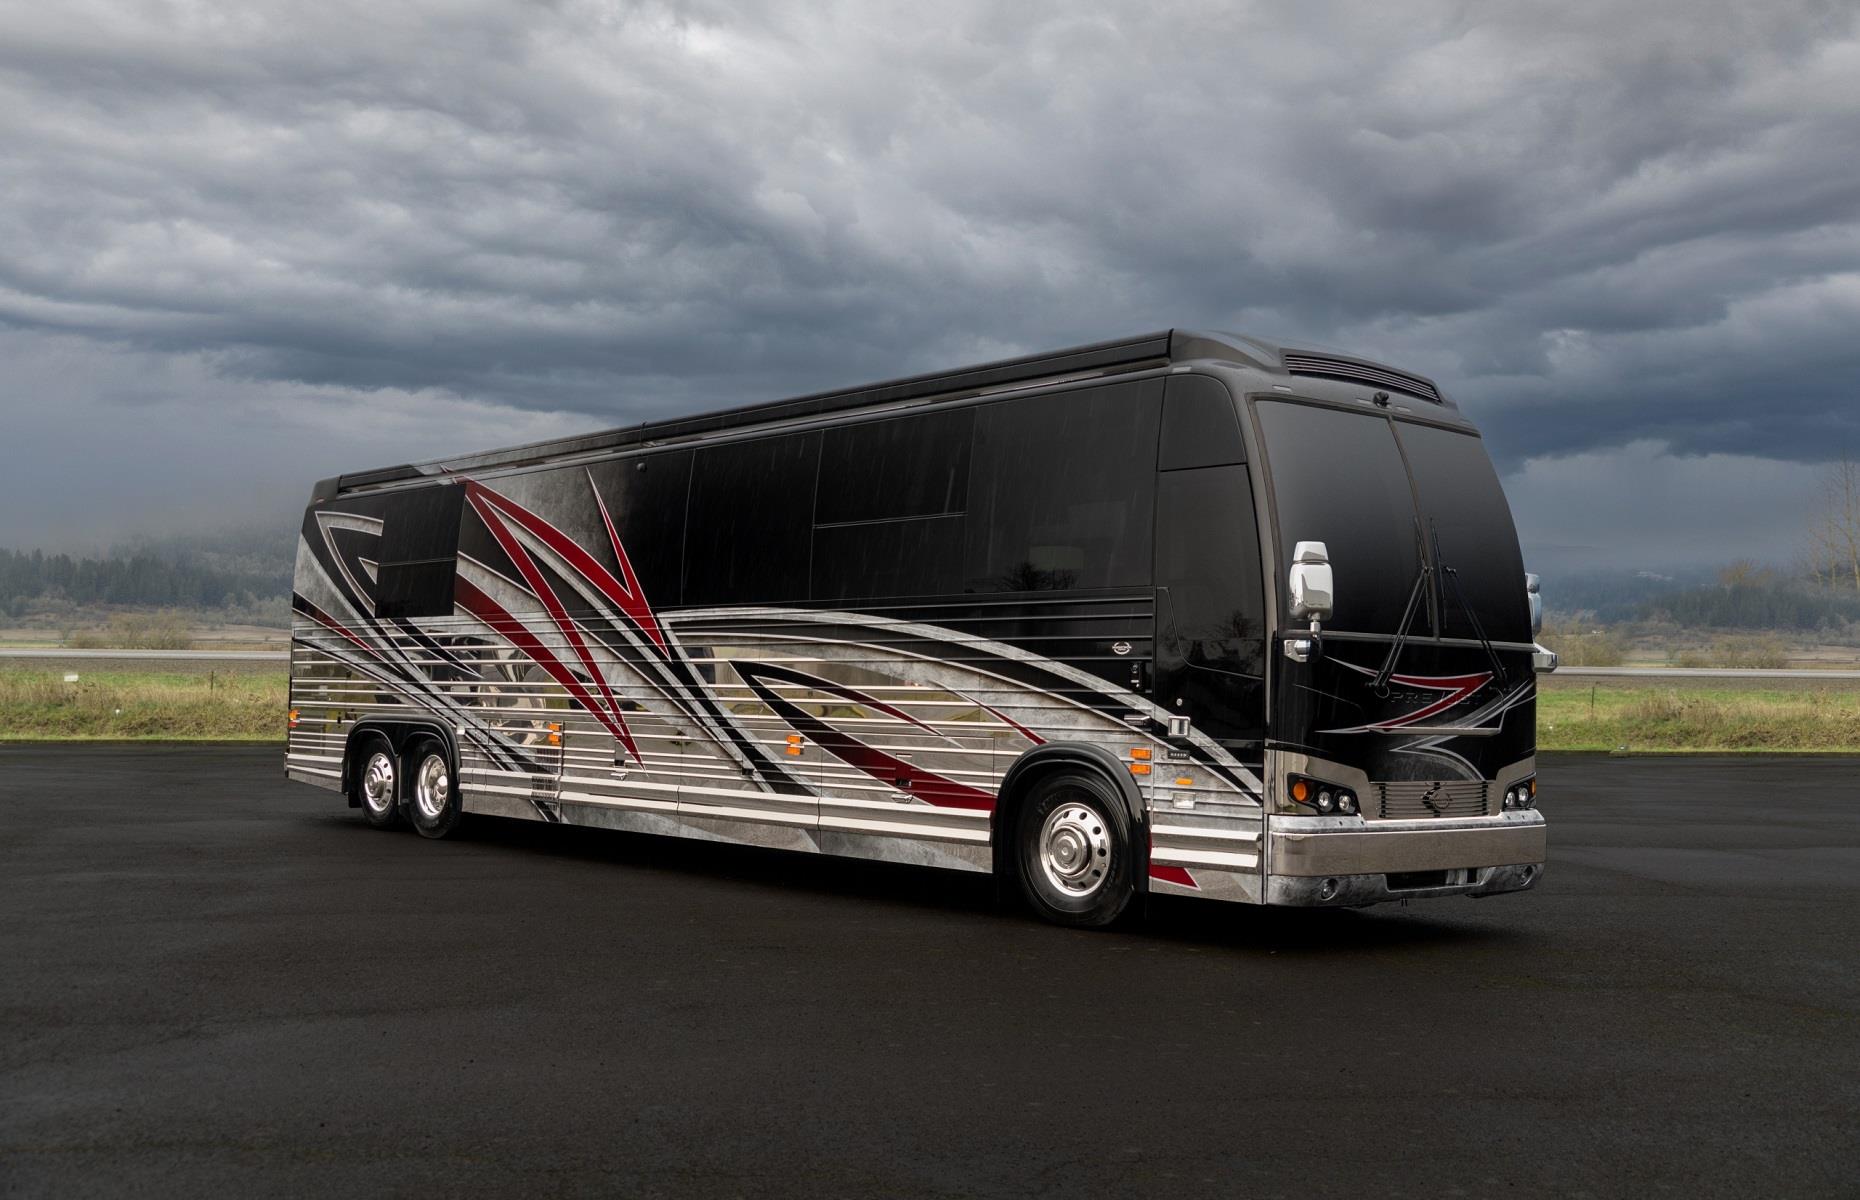 <p>Known for their innovation, craftsmanship and eclectic designs, Marathon Coach makes thoroughly unique motorhomes, and the <a href="https://www.marathoncoach.com/product/marathon-coach-1365/">X3-45 #1365 model</a> is no exception. Costing a whopping $2.8 million, the sublime coach dazzles with its bold exterior detailing – but that's nothing compared to what awaits inside... </p>